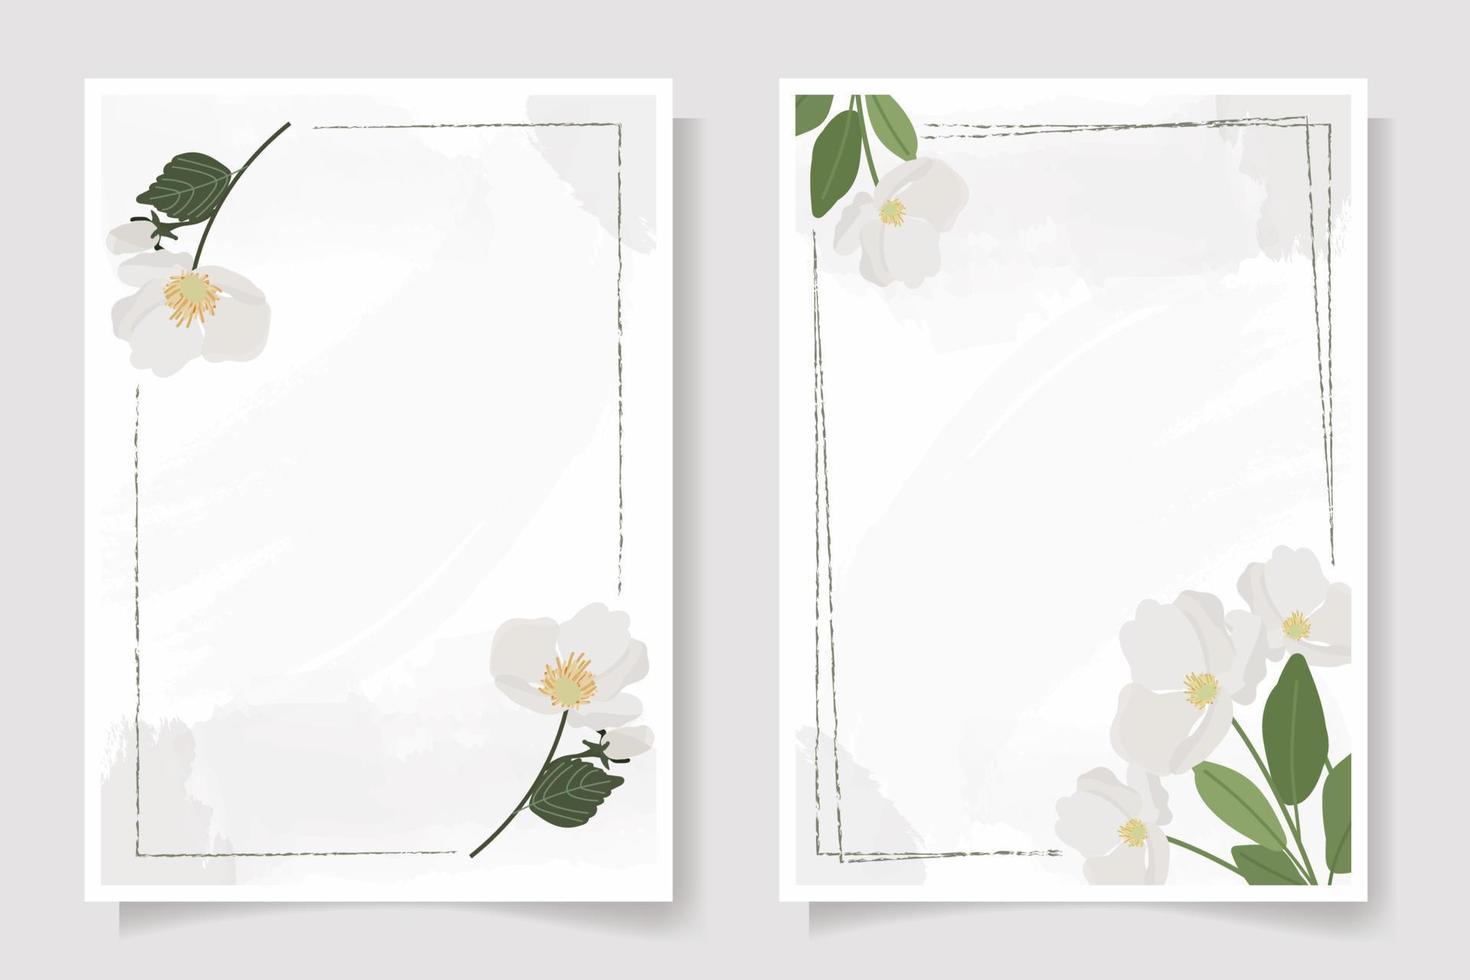 beautiful minimal white camellia wreath frame wedding or birthday invitation card template collection vector